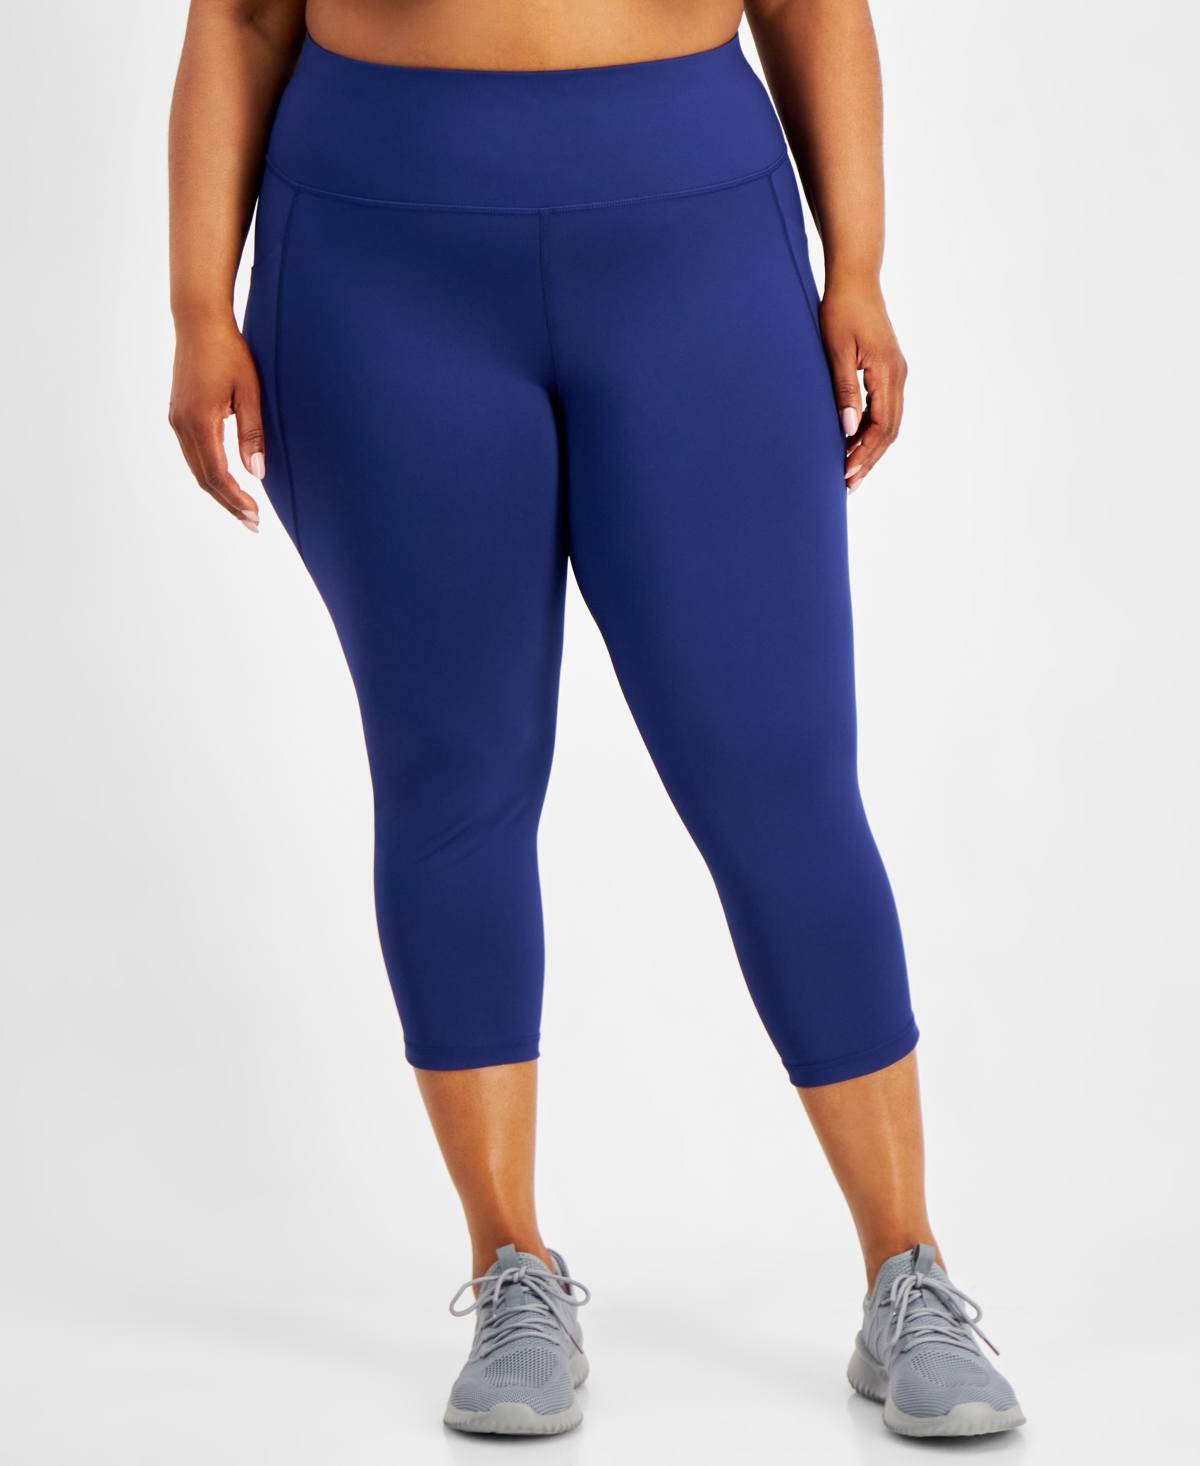 Plus Size Compression Cropped Leggings, Created for Macy's - Tartan Blue